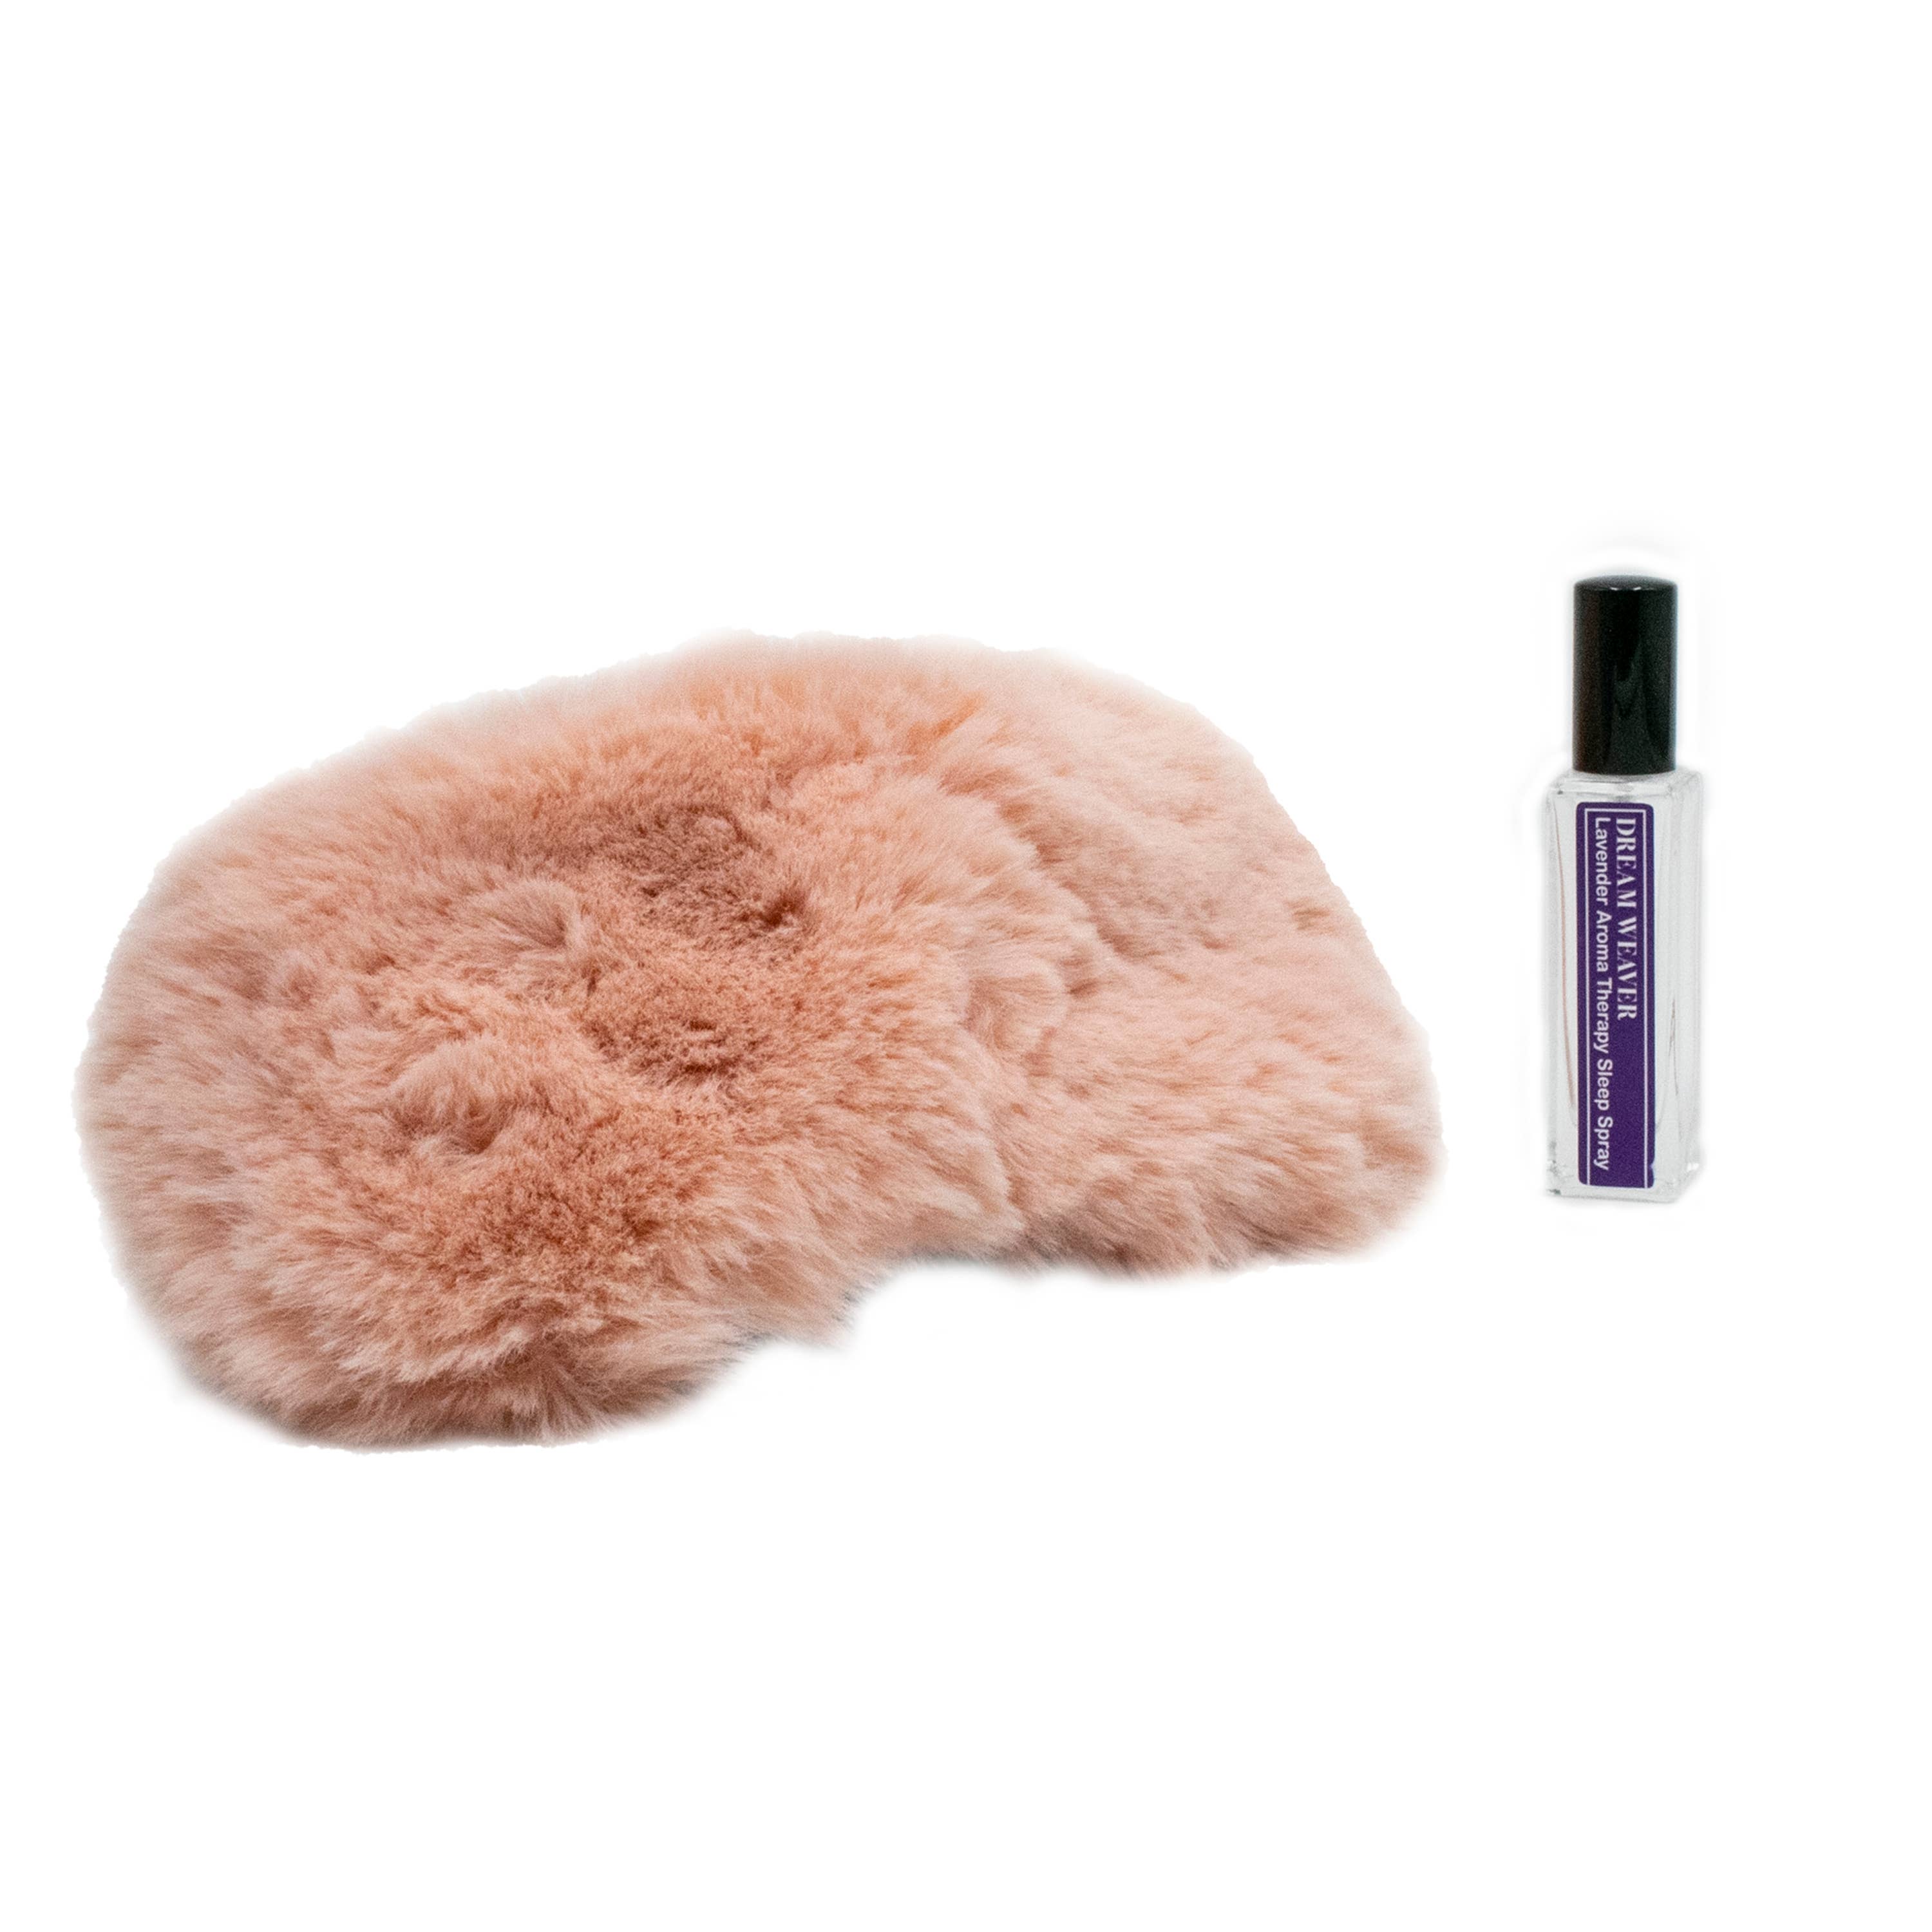 Fur Sleep Mask with Lavender Essential Oil Spray, Pink - Green Dragon Boutique